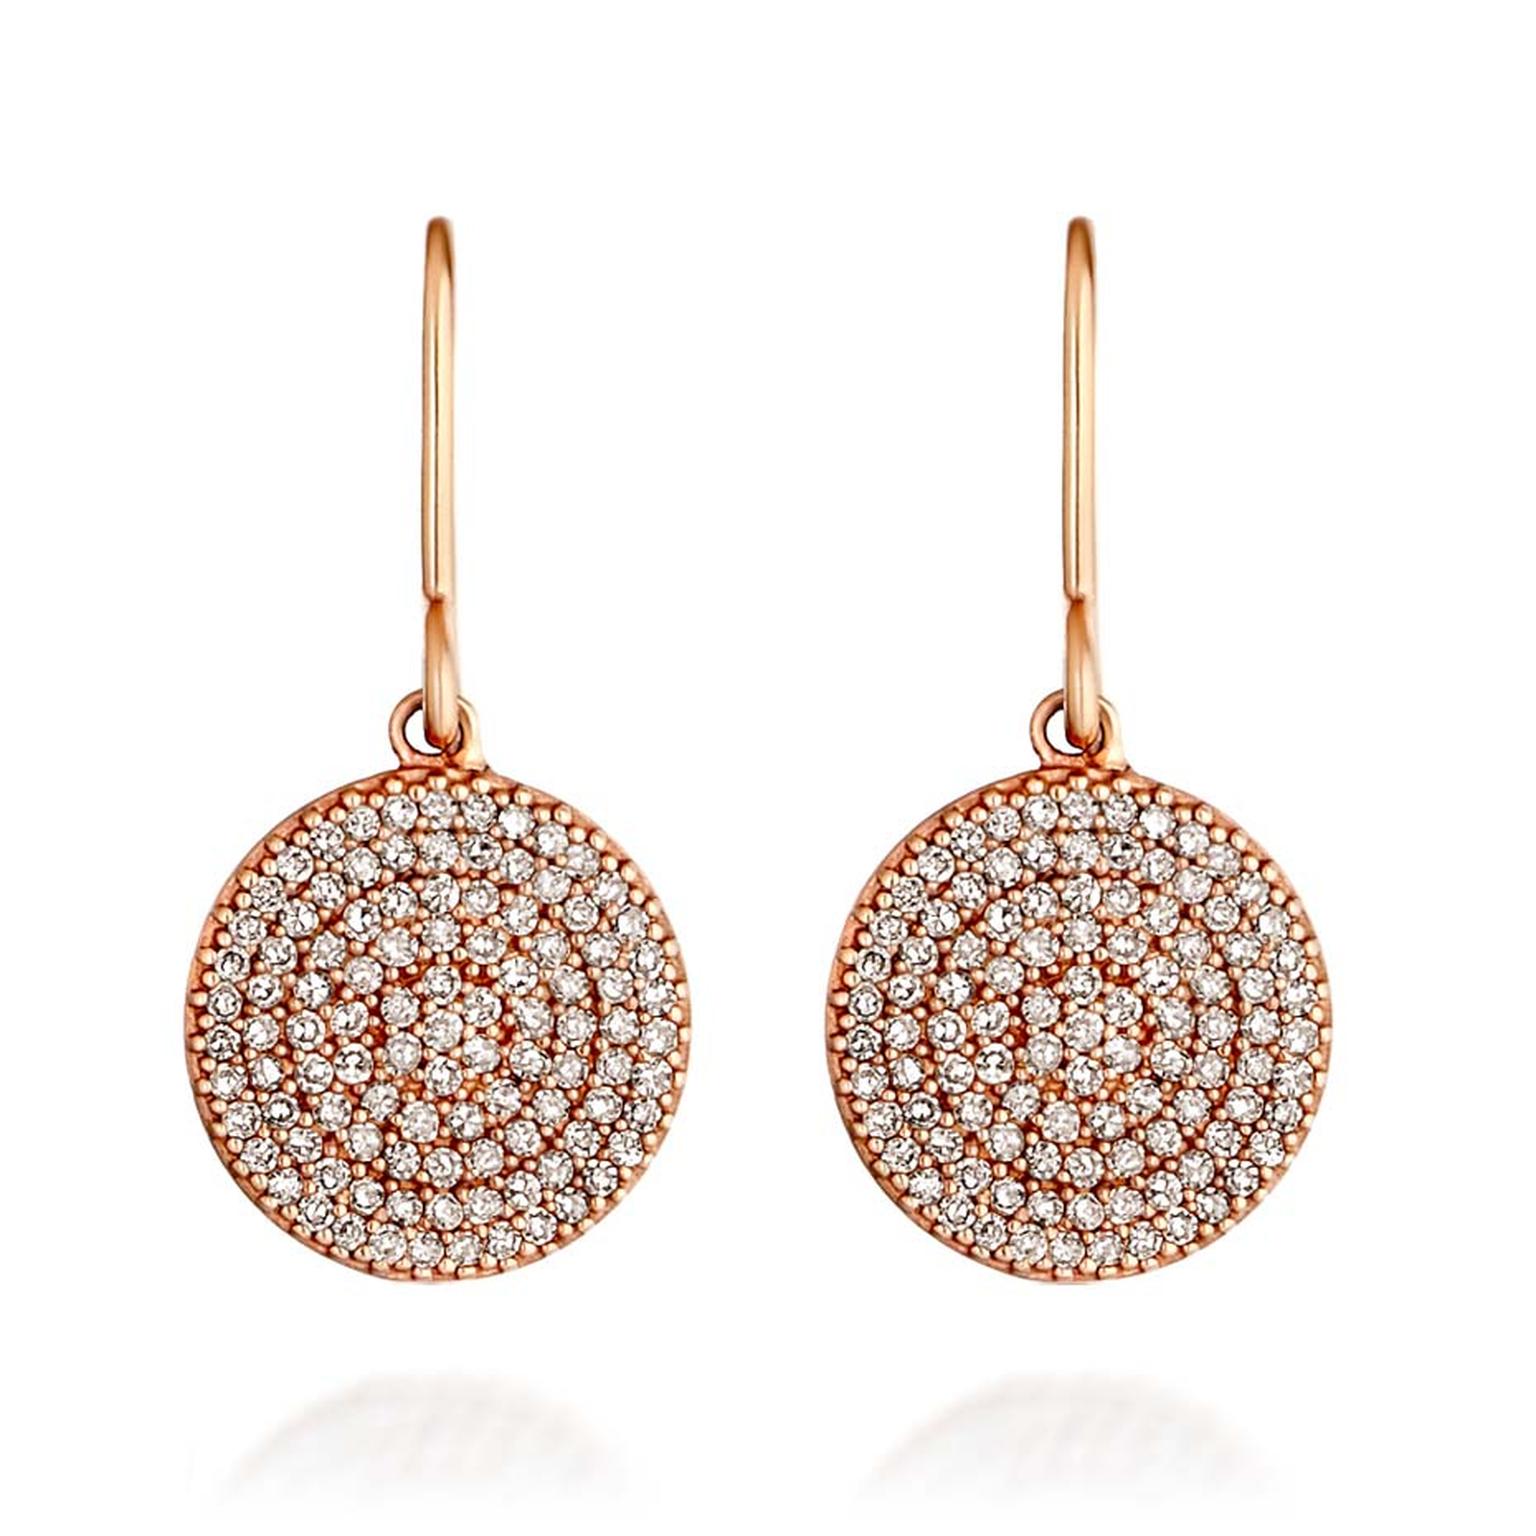 Astley Clarke Muse collection Icon earrings in rose gold with silver grey diamonds.